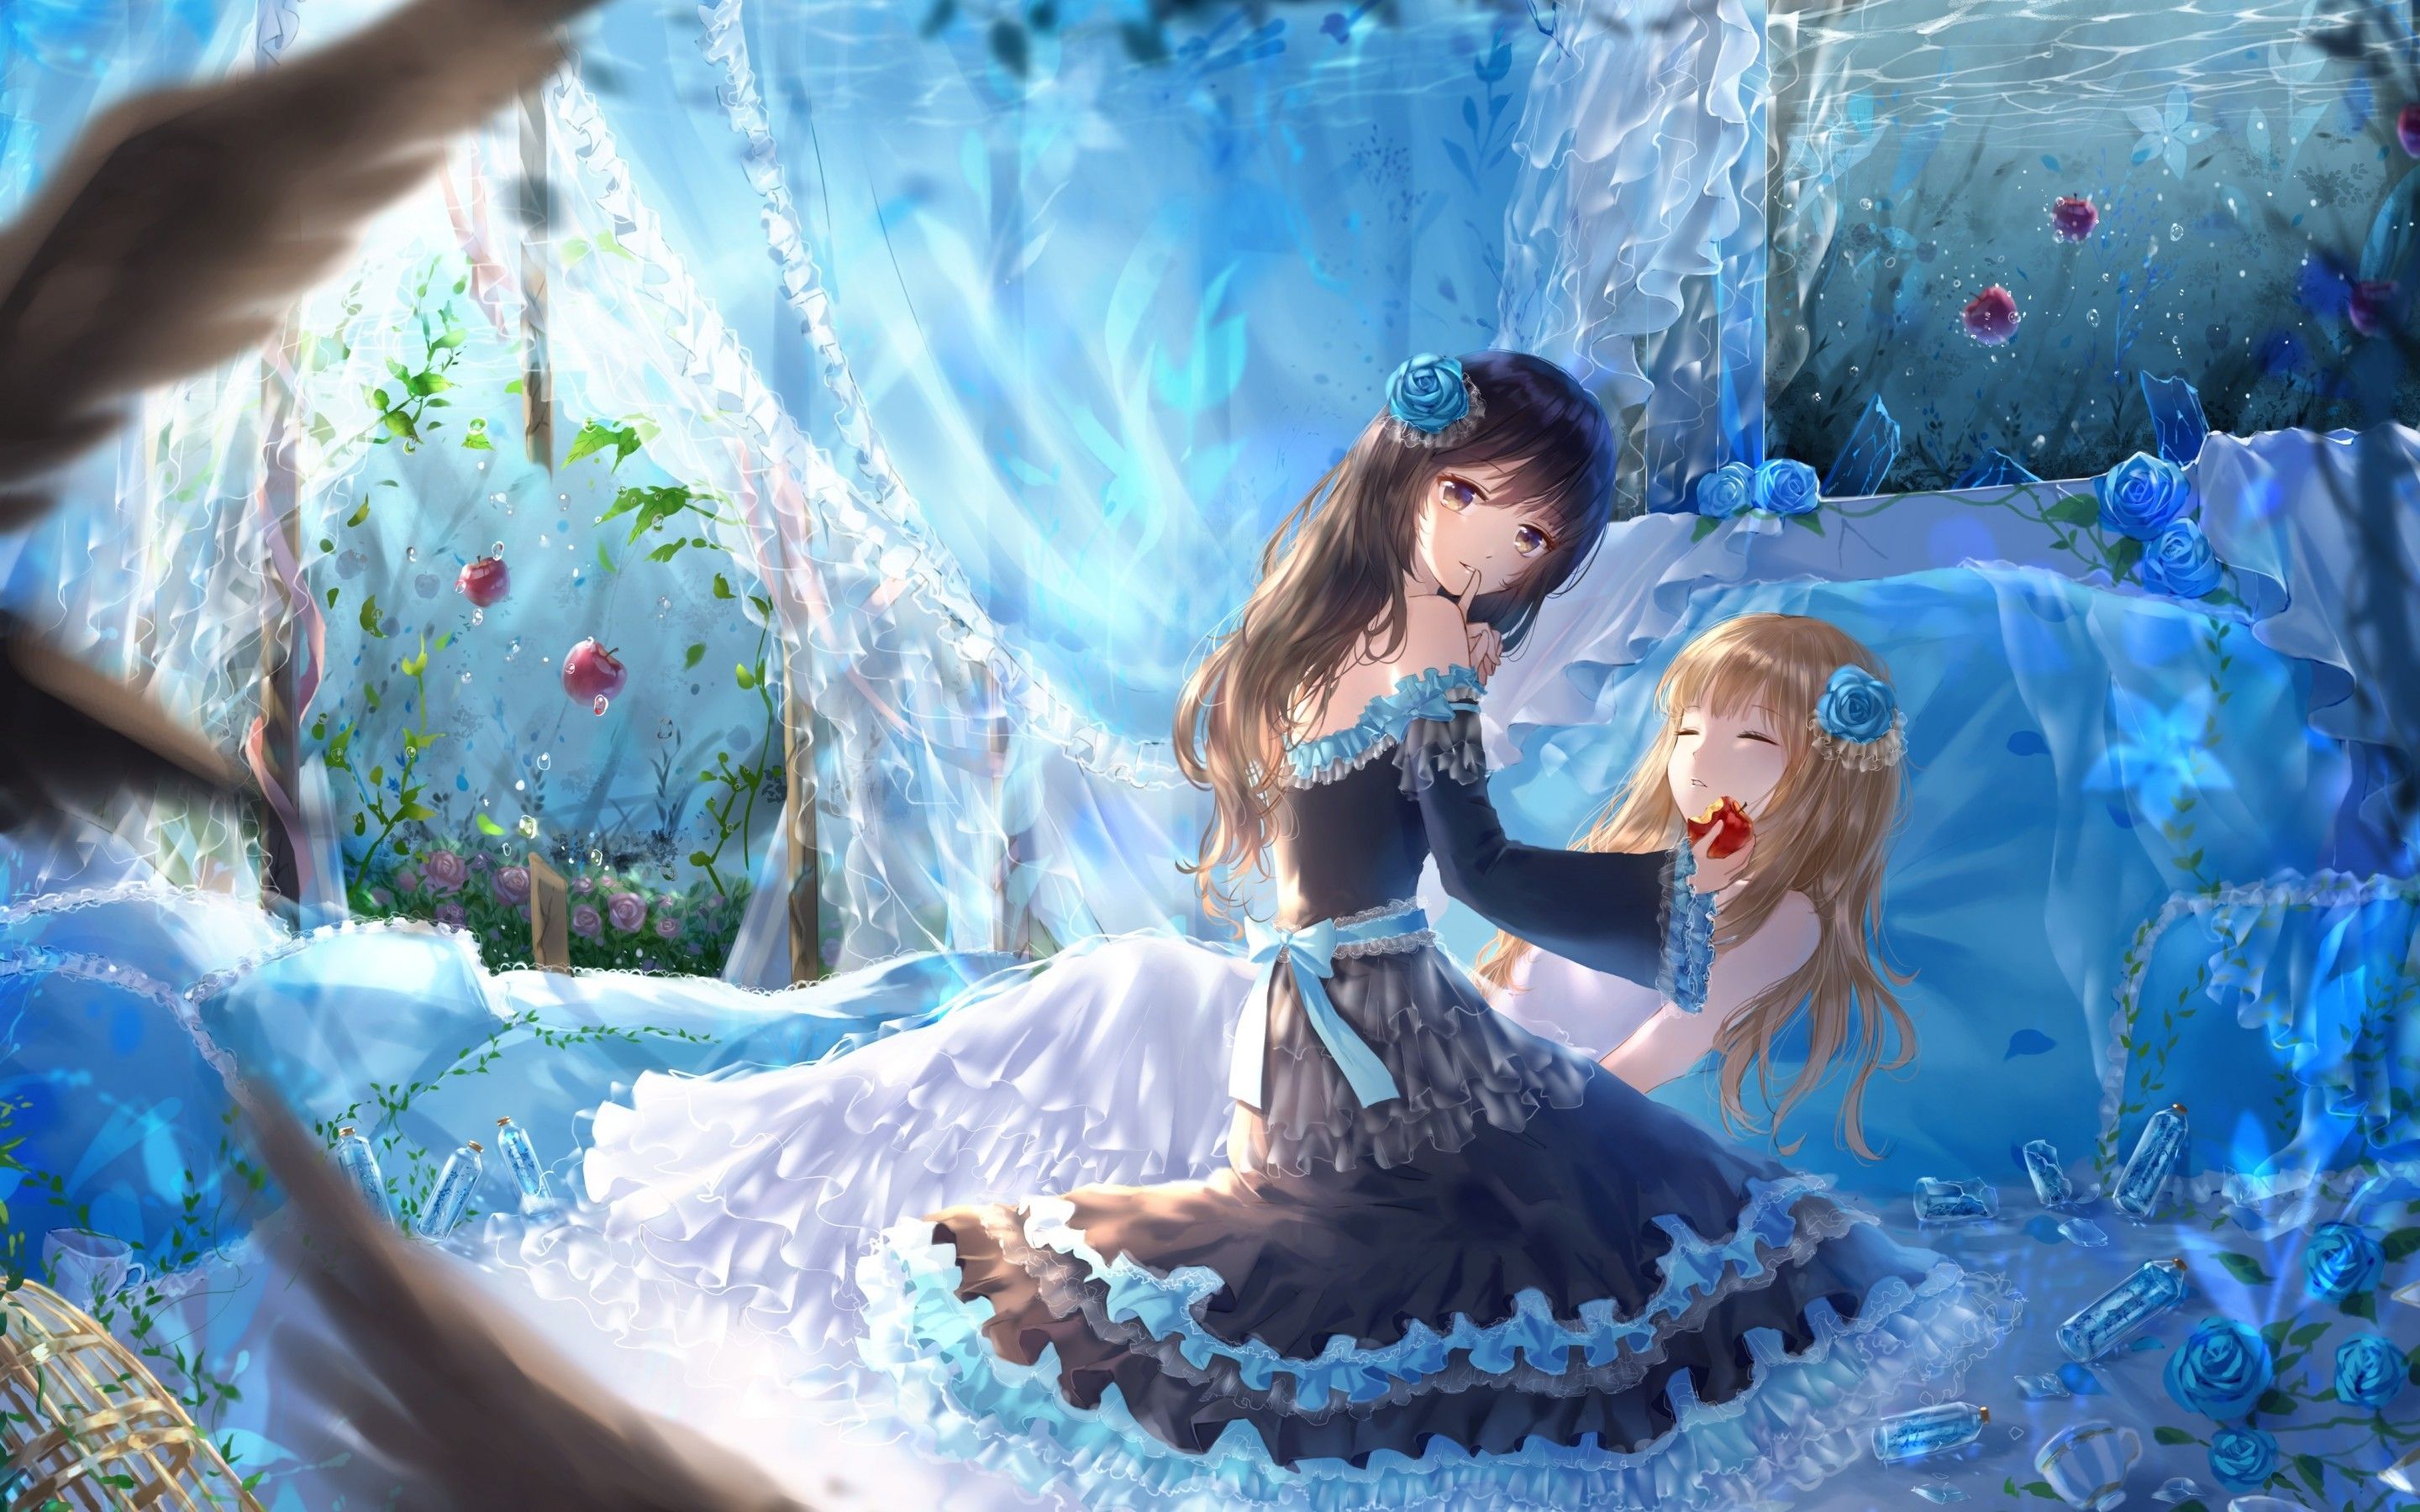 Download 2880x1800 Anime Girl, Underwater, Princess, Apple, Shhh, Blue Roses, Dresses Wallpaper for MacBook Pro 15 inch